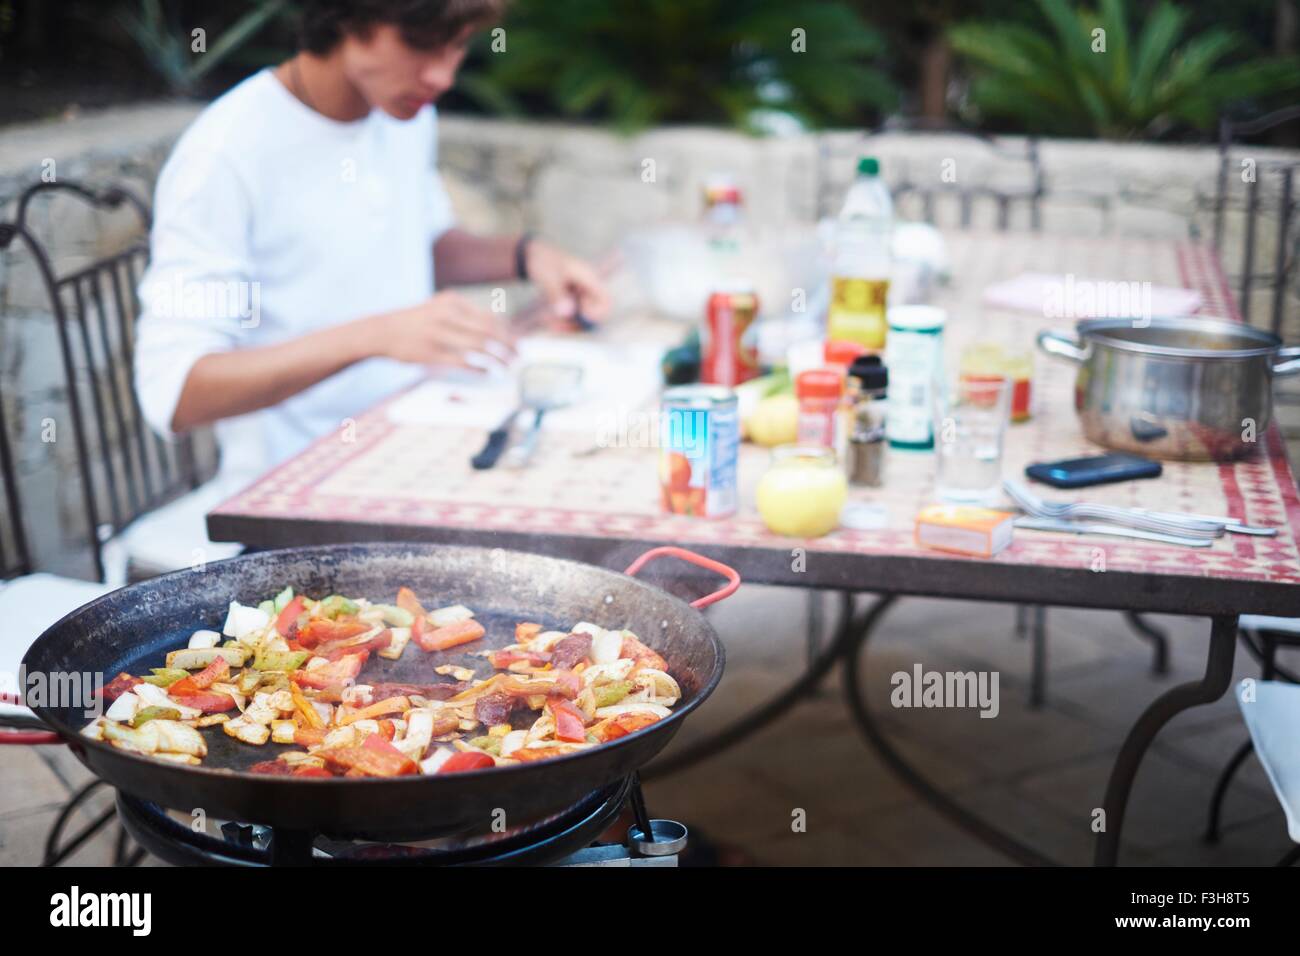 Young man eating stir fried lunch at patio table Stock Photo